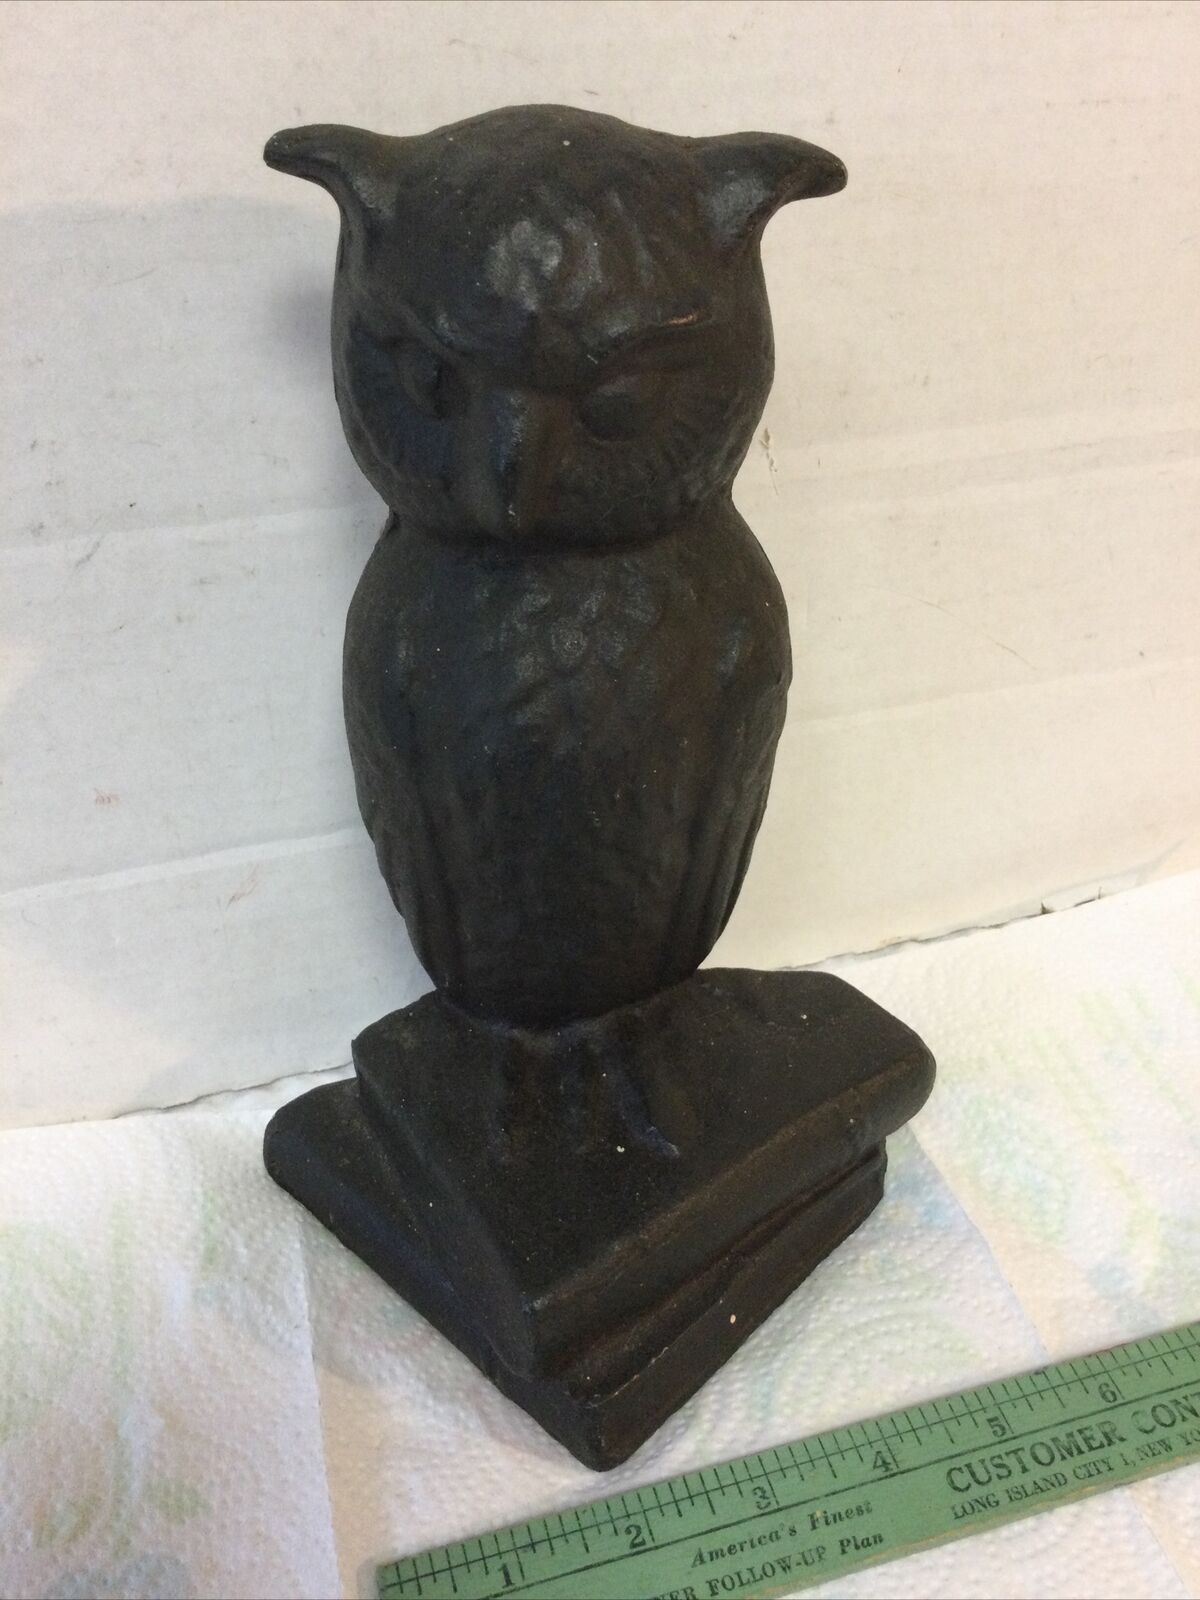 Genuine Antique Cast Iron Doorstop Owl on Books made by Eastern Specialty Mfg Co